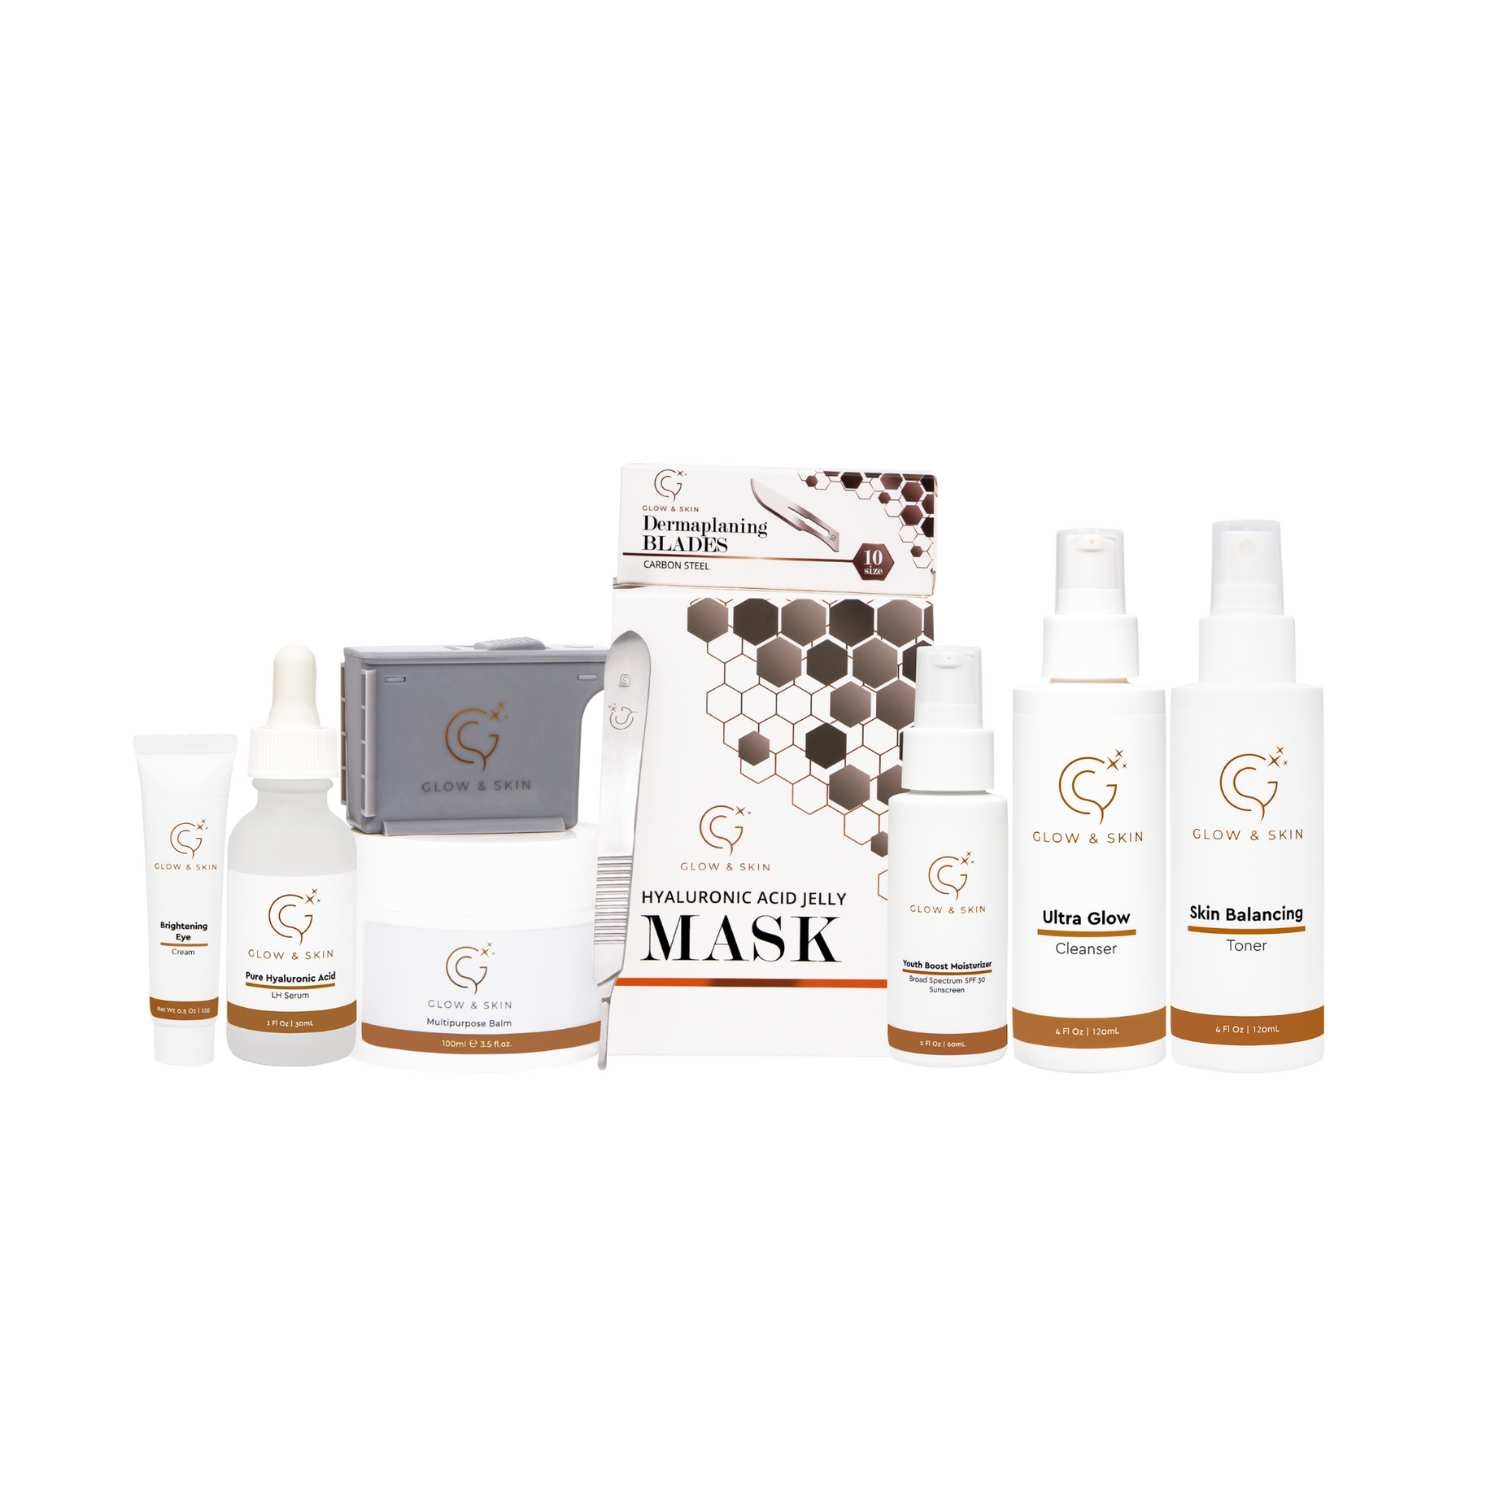 Complete dermaplaning kit for professional-grade exfoliation